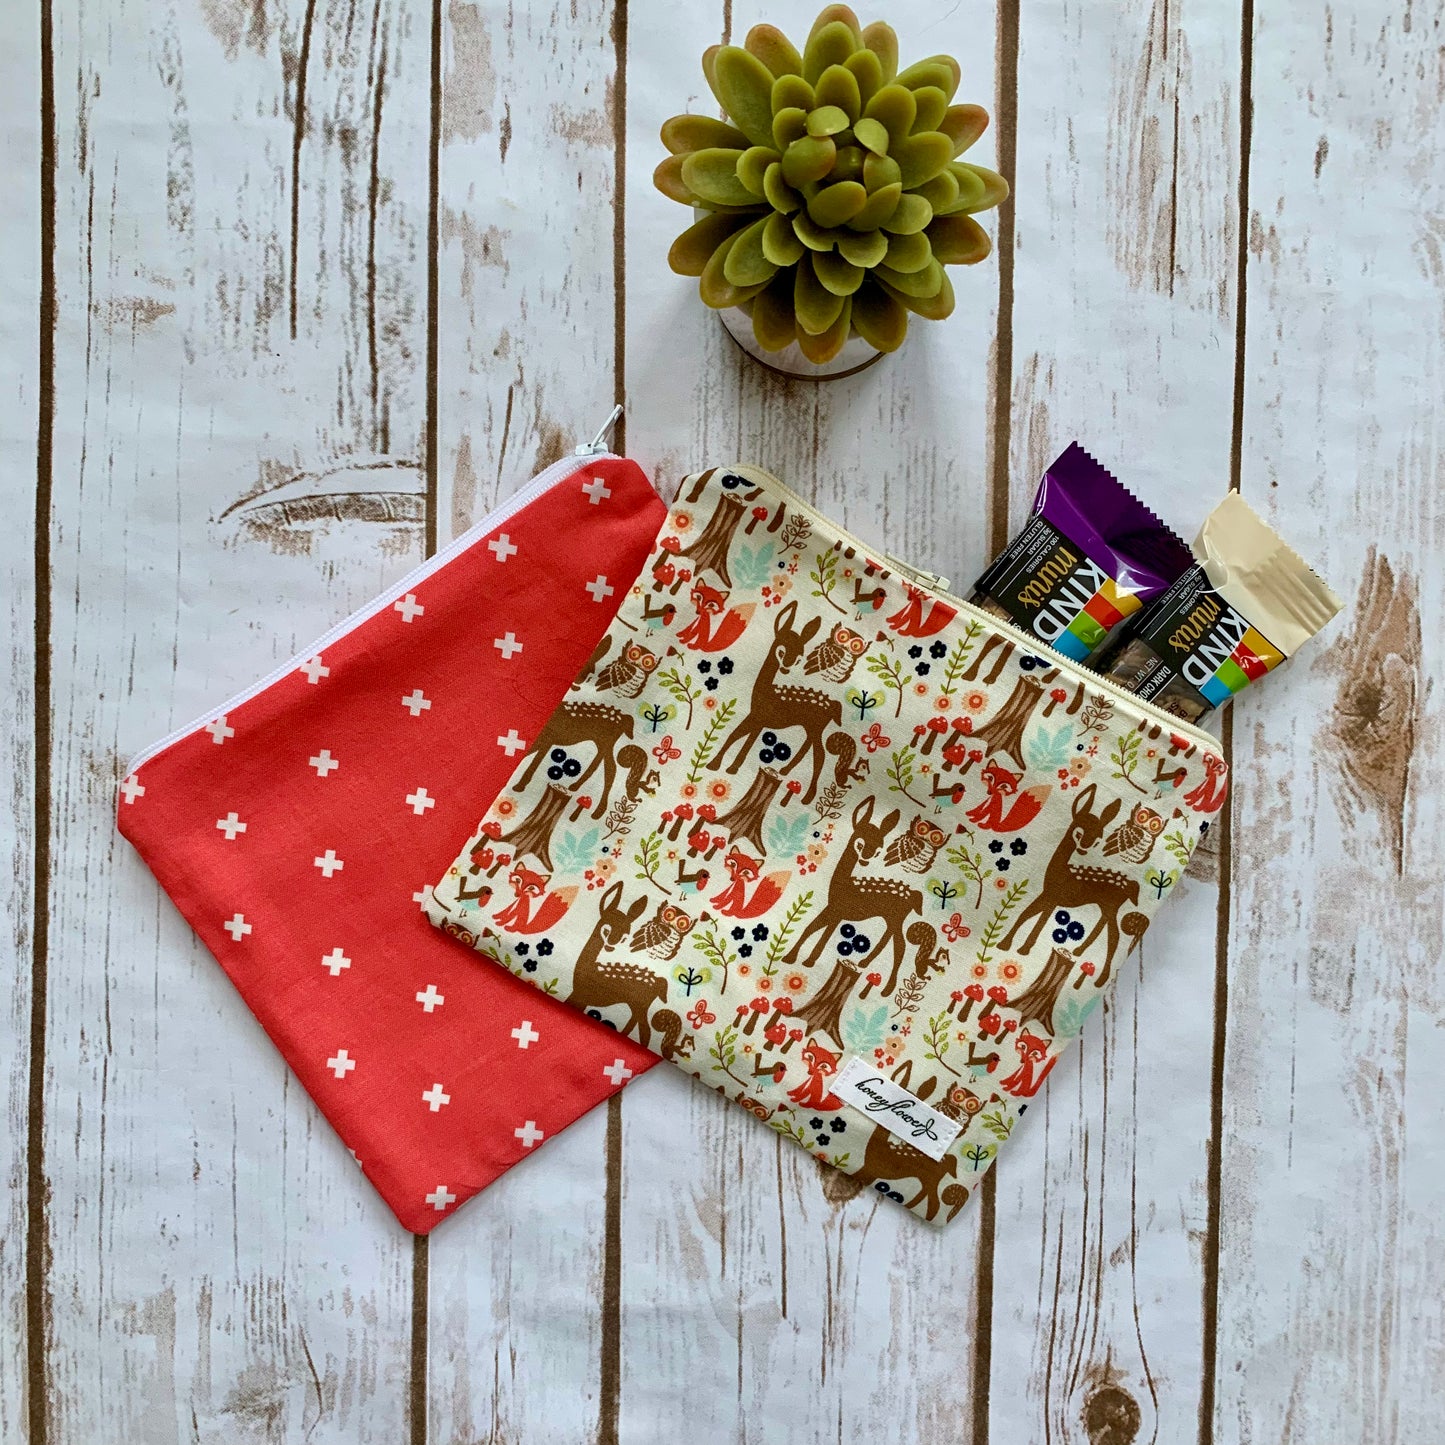 Reusable Snack Pouch | pack of 2 | 100% cotton | choice of floral & nature prints